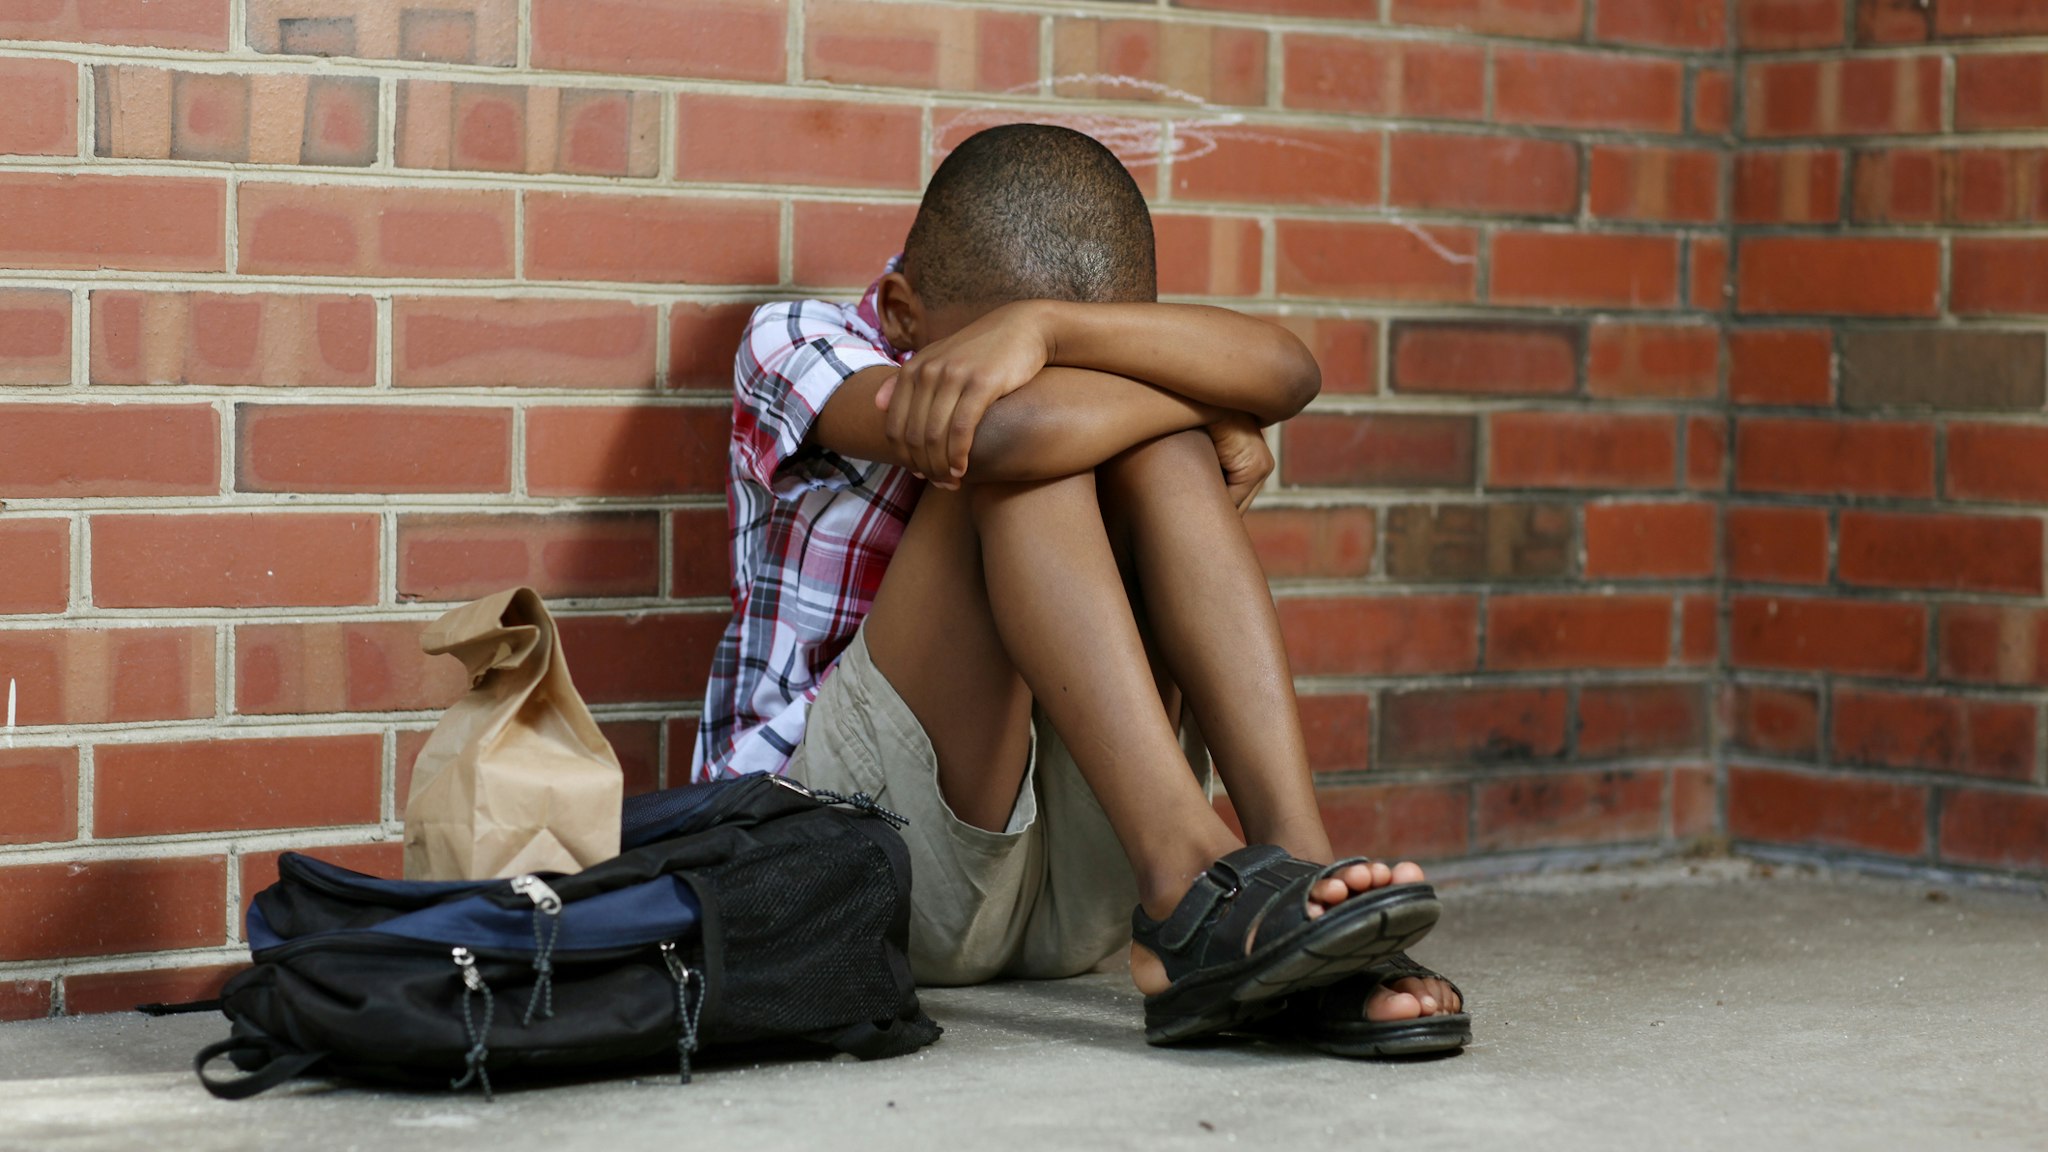 Sitting alone a poor child is bullied at school. - stock photo